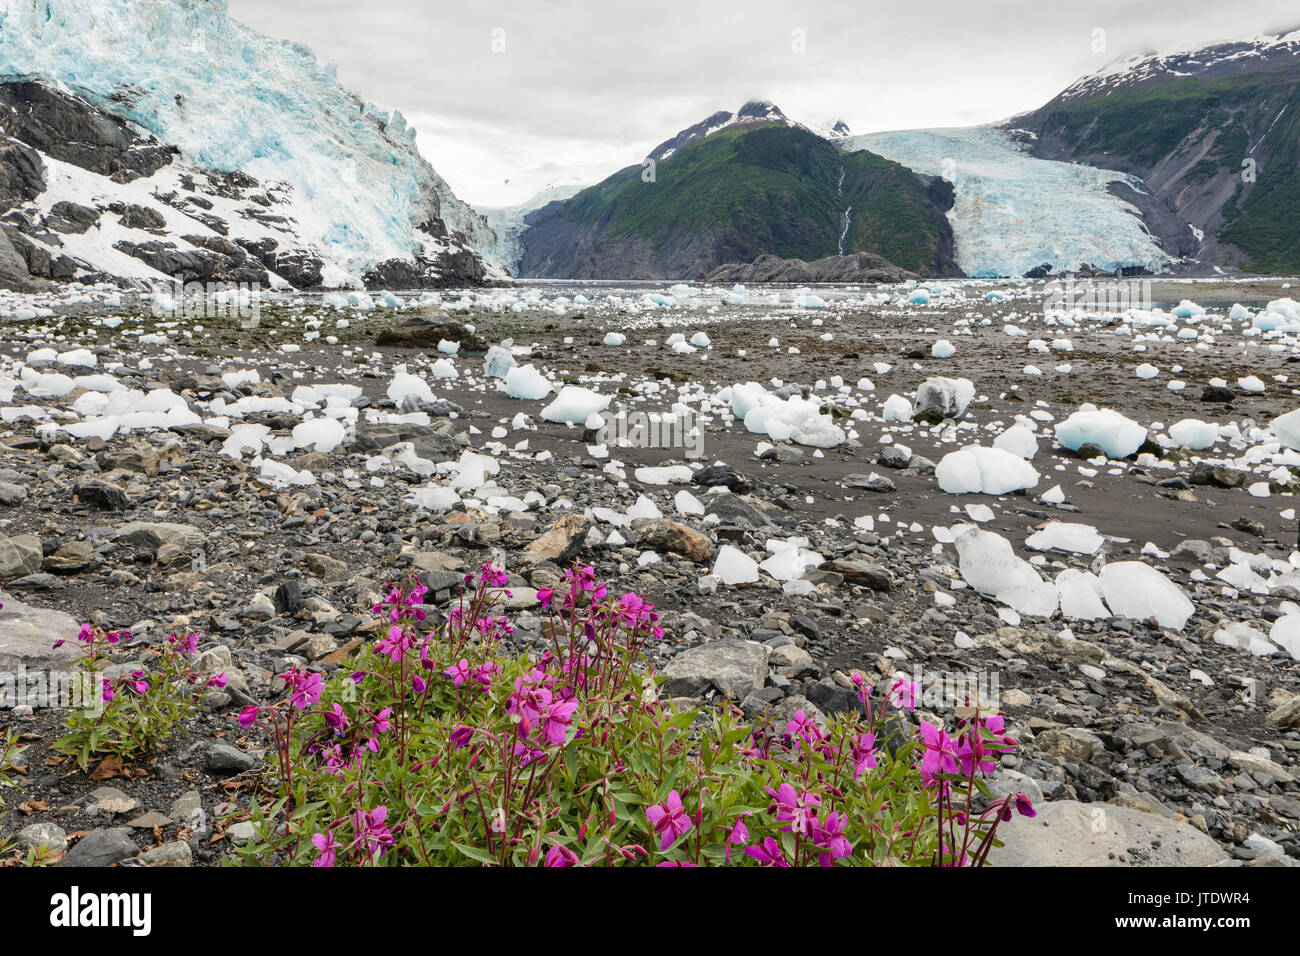 Dwarf Fireweed (Epilobium latifolium) contrasts with icebergs from Cascade, Barry, and Coxe Glaciers in Prince William Sound in Southcentral Alaska. Stock Photo